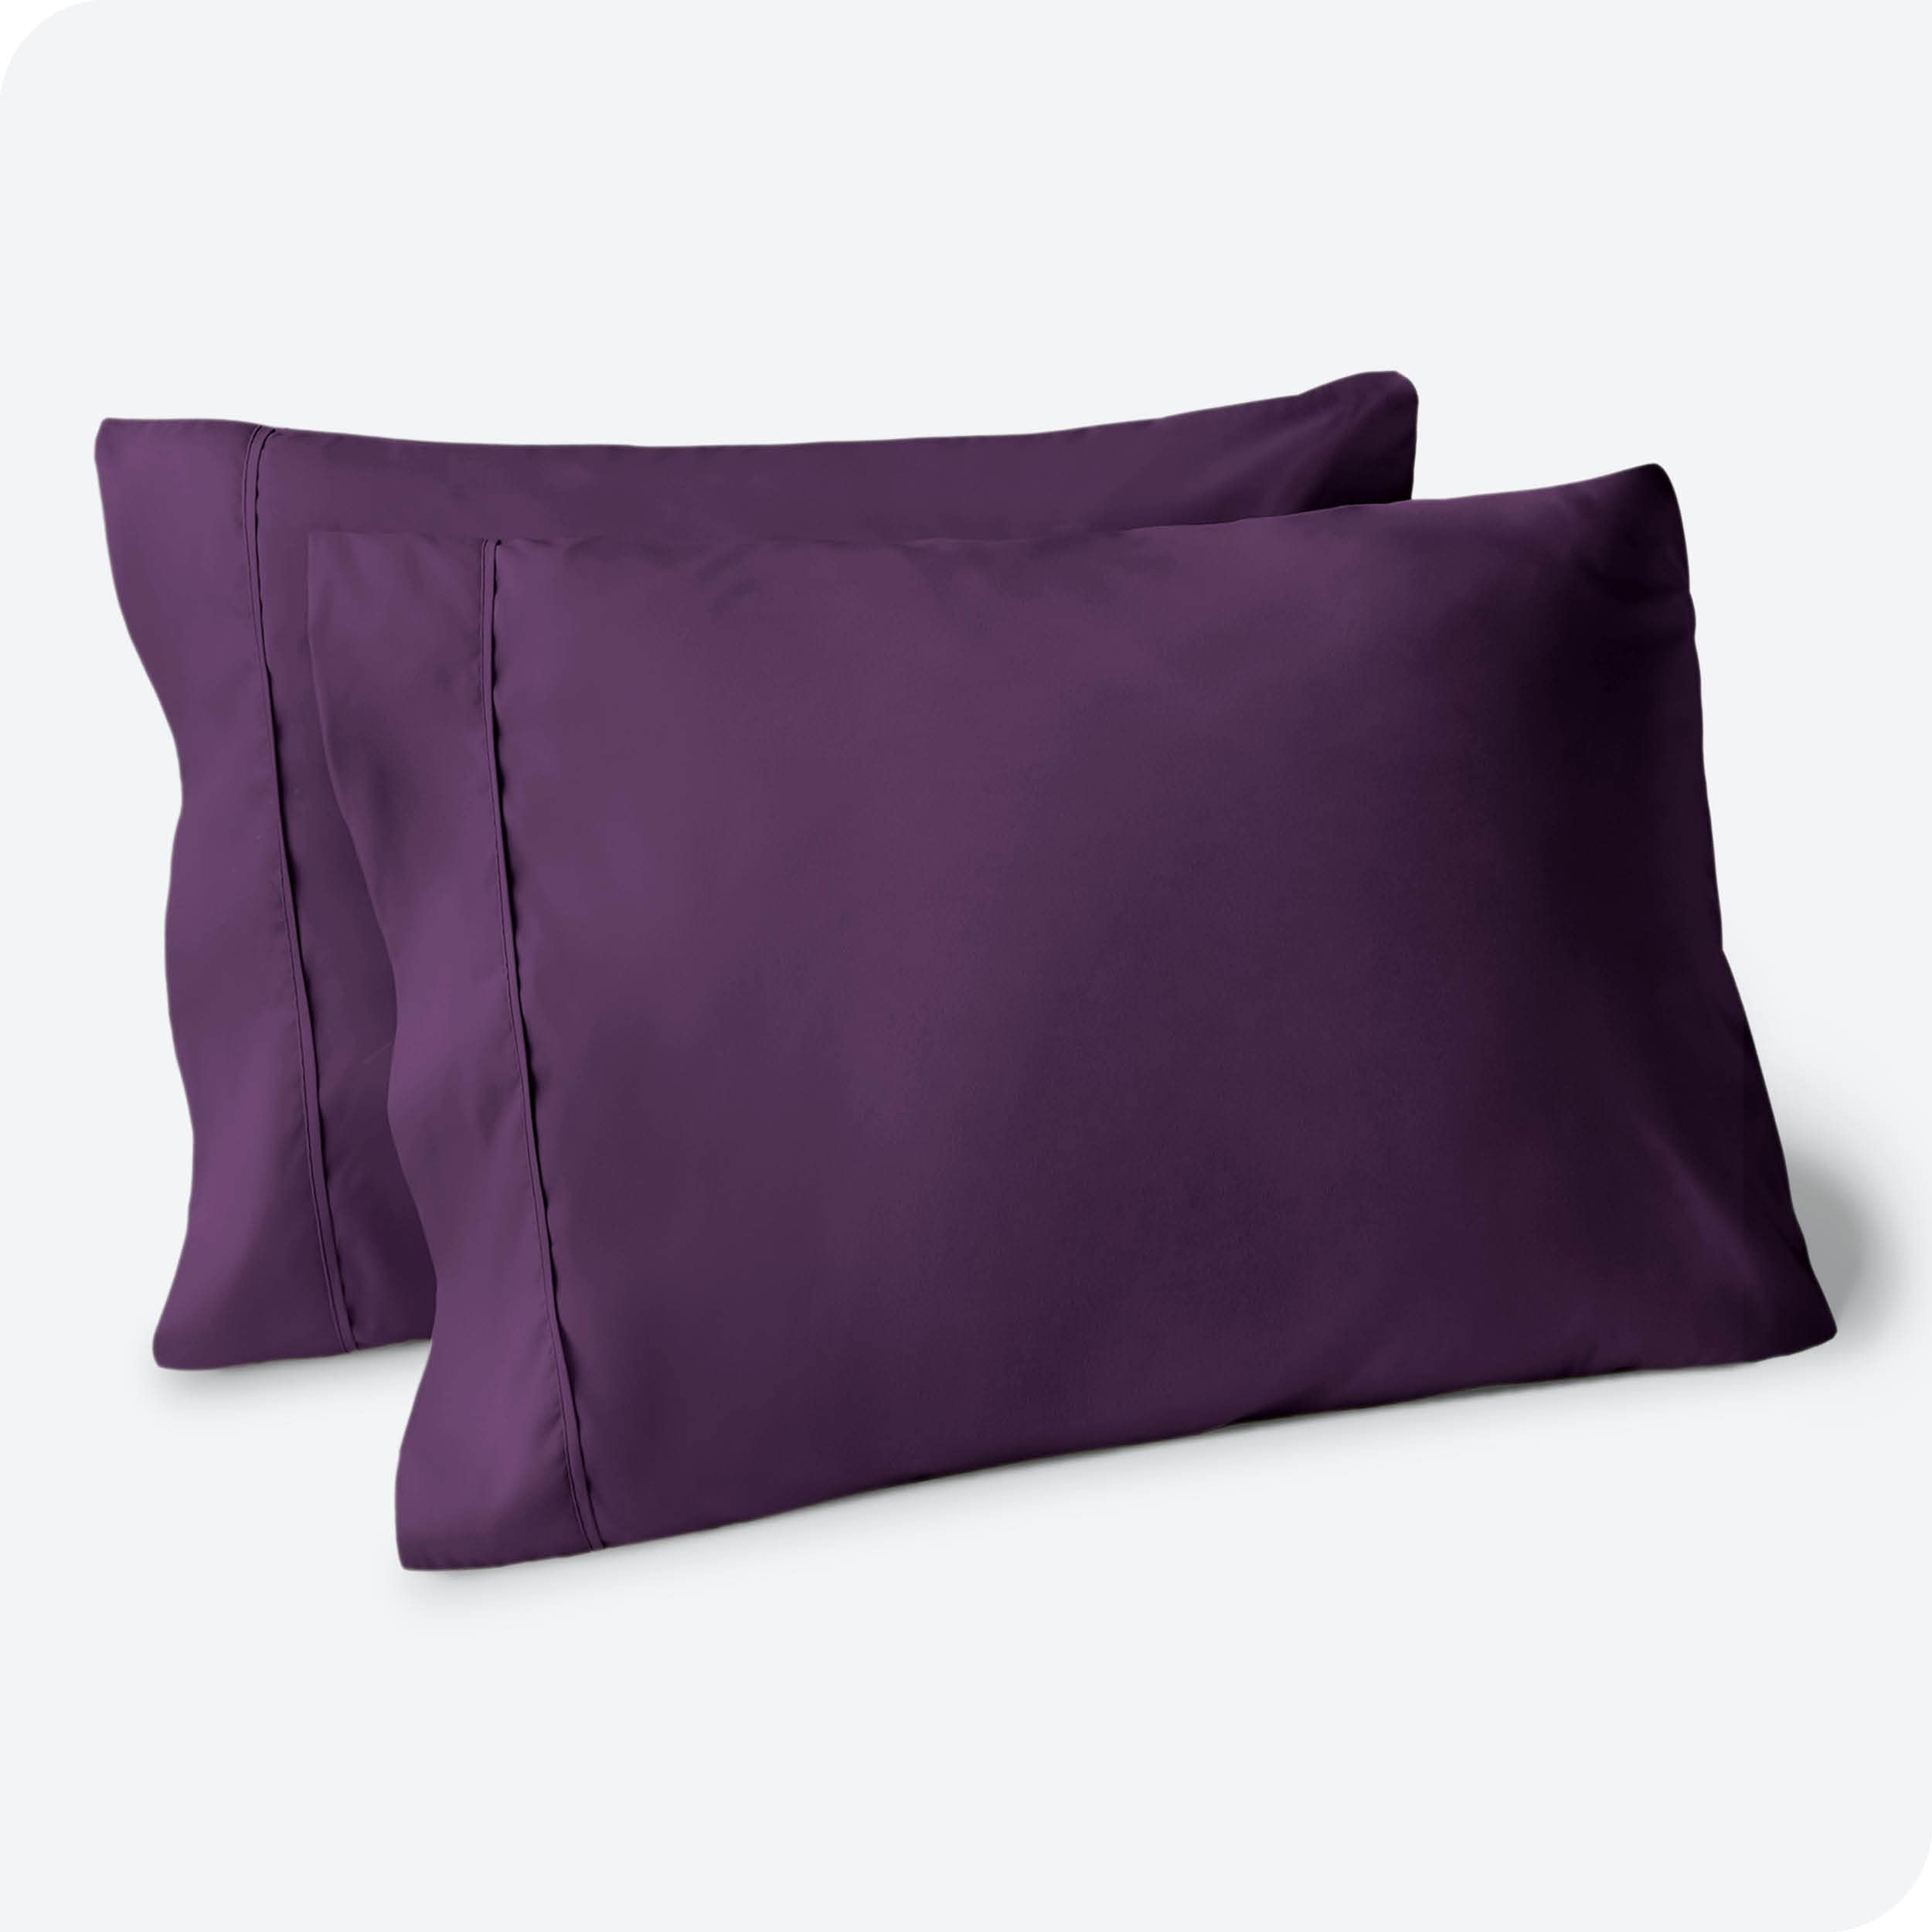 Book Cover Bare Home Microfiber Pillow Cases - King Size Set of 2 - Cooling Pillowcases - Double Brushed - Plum Pillowcases 2 Pack - Easy Care (King Pillowcase Set of 2, Plum) 20x40 King (2 Pack) 19 - Plum